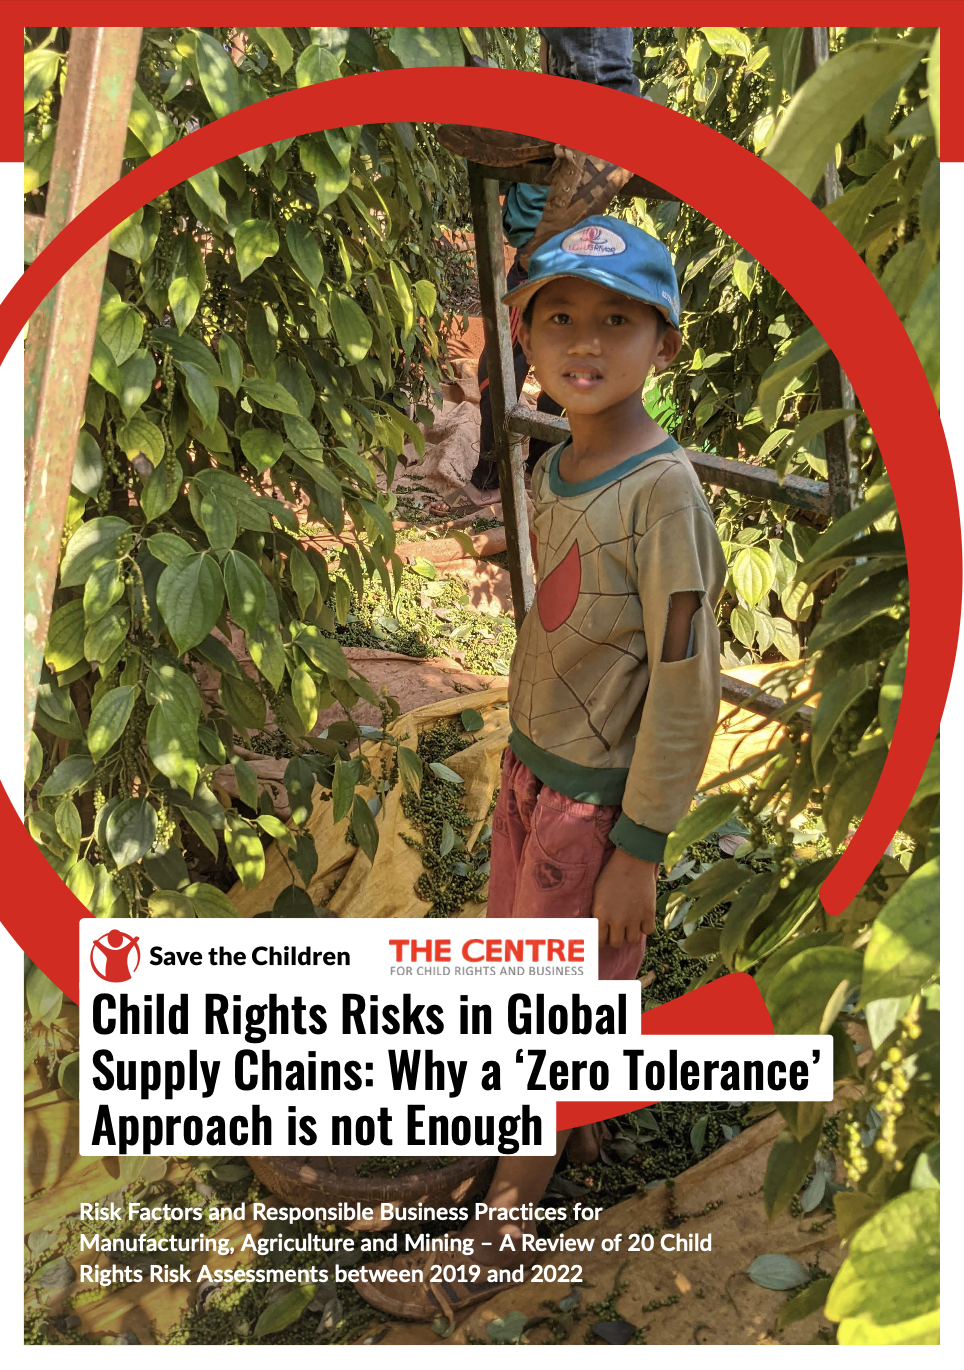 Press Release | New Study on Child Rights Risks in Global Supply Chains: Why a ‘Zero Tolerance’ Approach is Not Enough